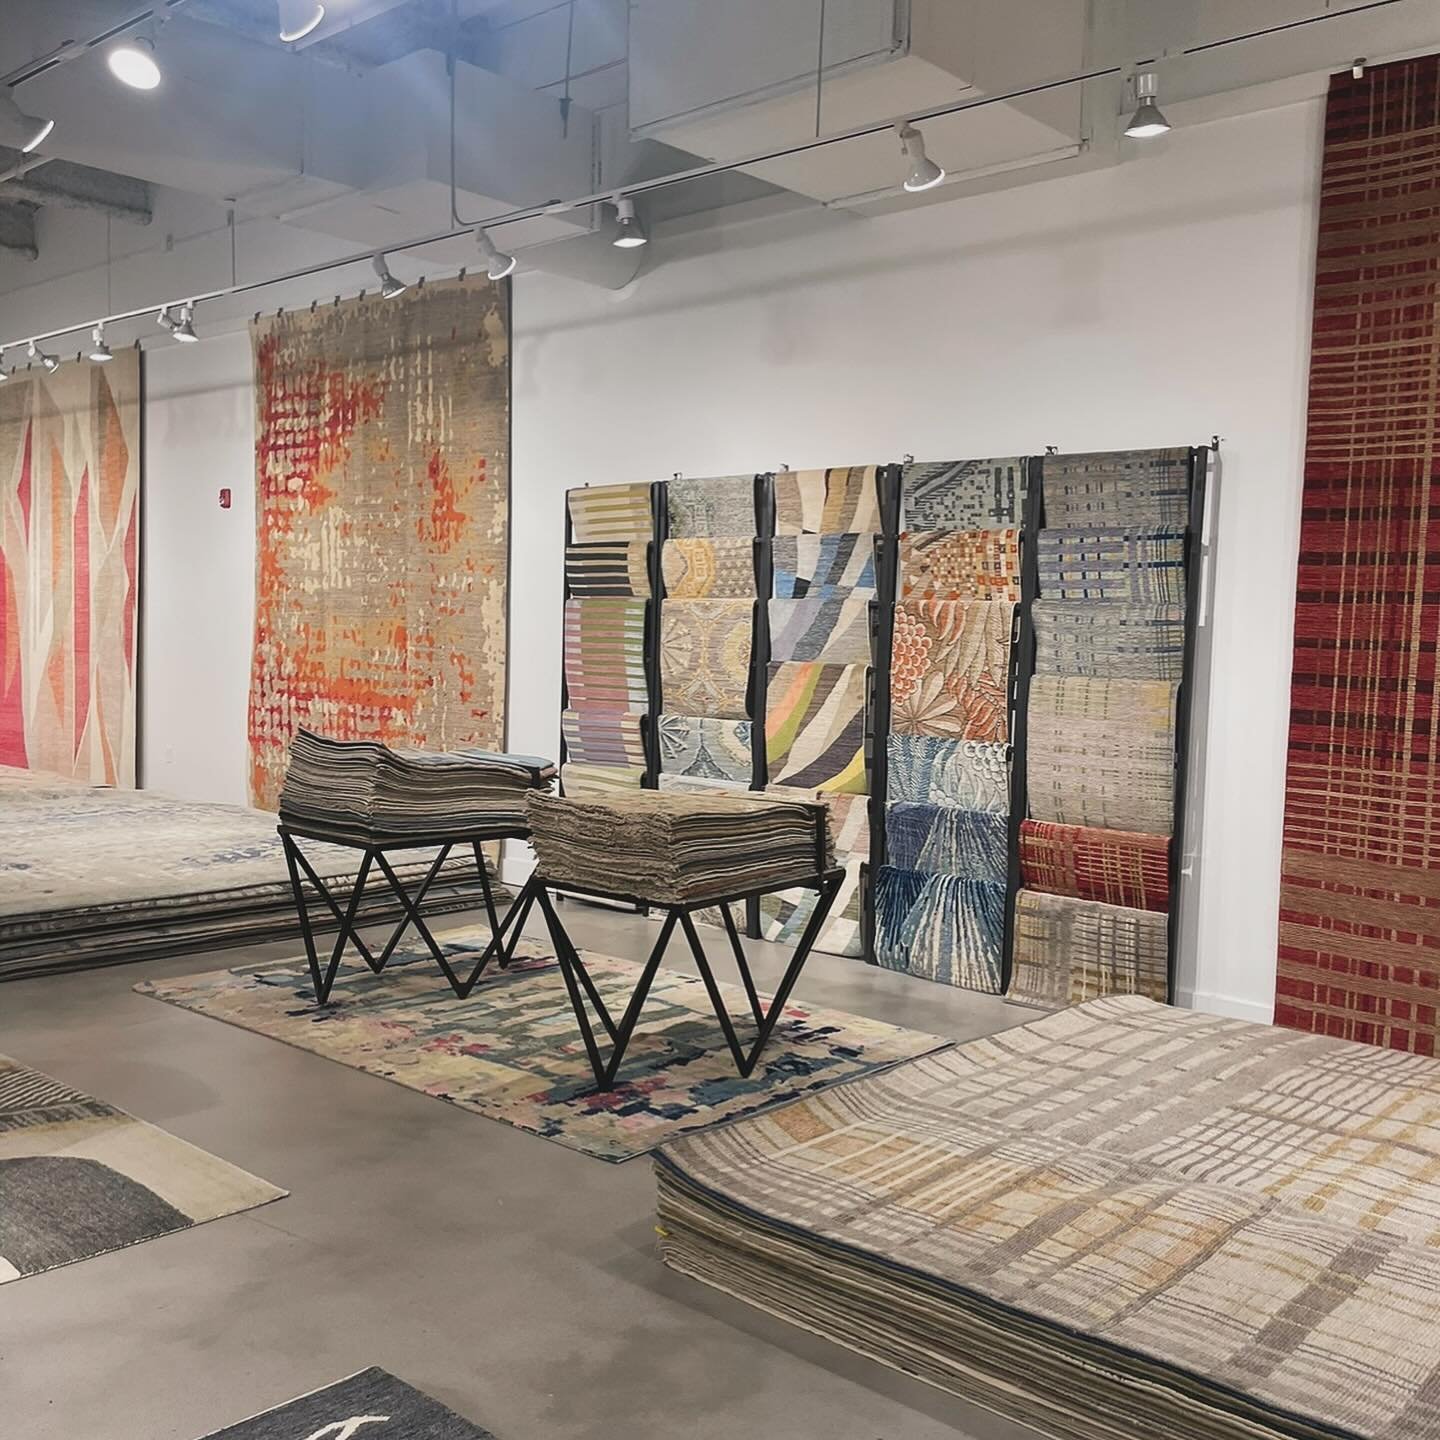 Today is the last day of @hpmkt. We are open till 2 p.m.  Thank you to everyone who has supported us and visited our showroom during the market. We are privileged to be able to share our passion for hand-knotted rugs. Despite it being the last day, w